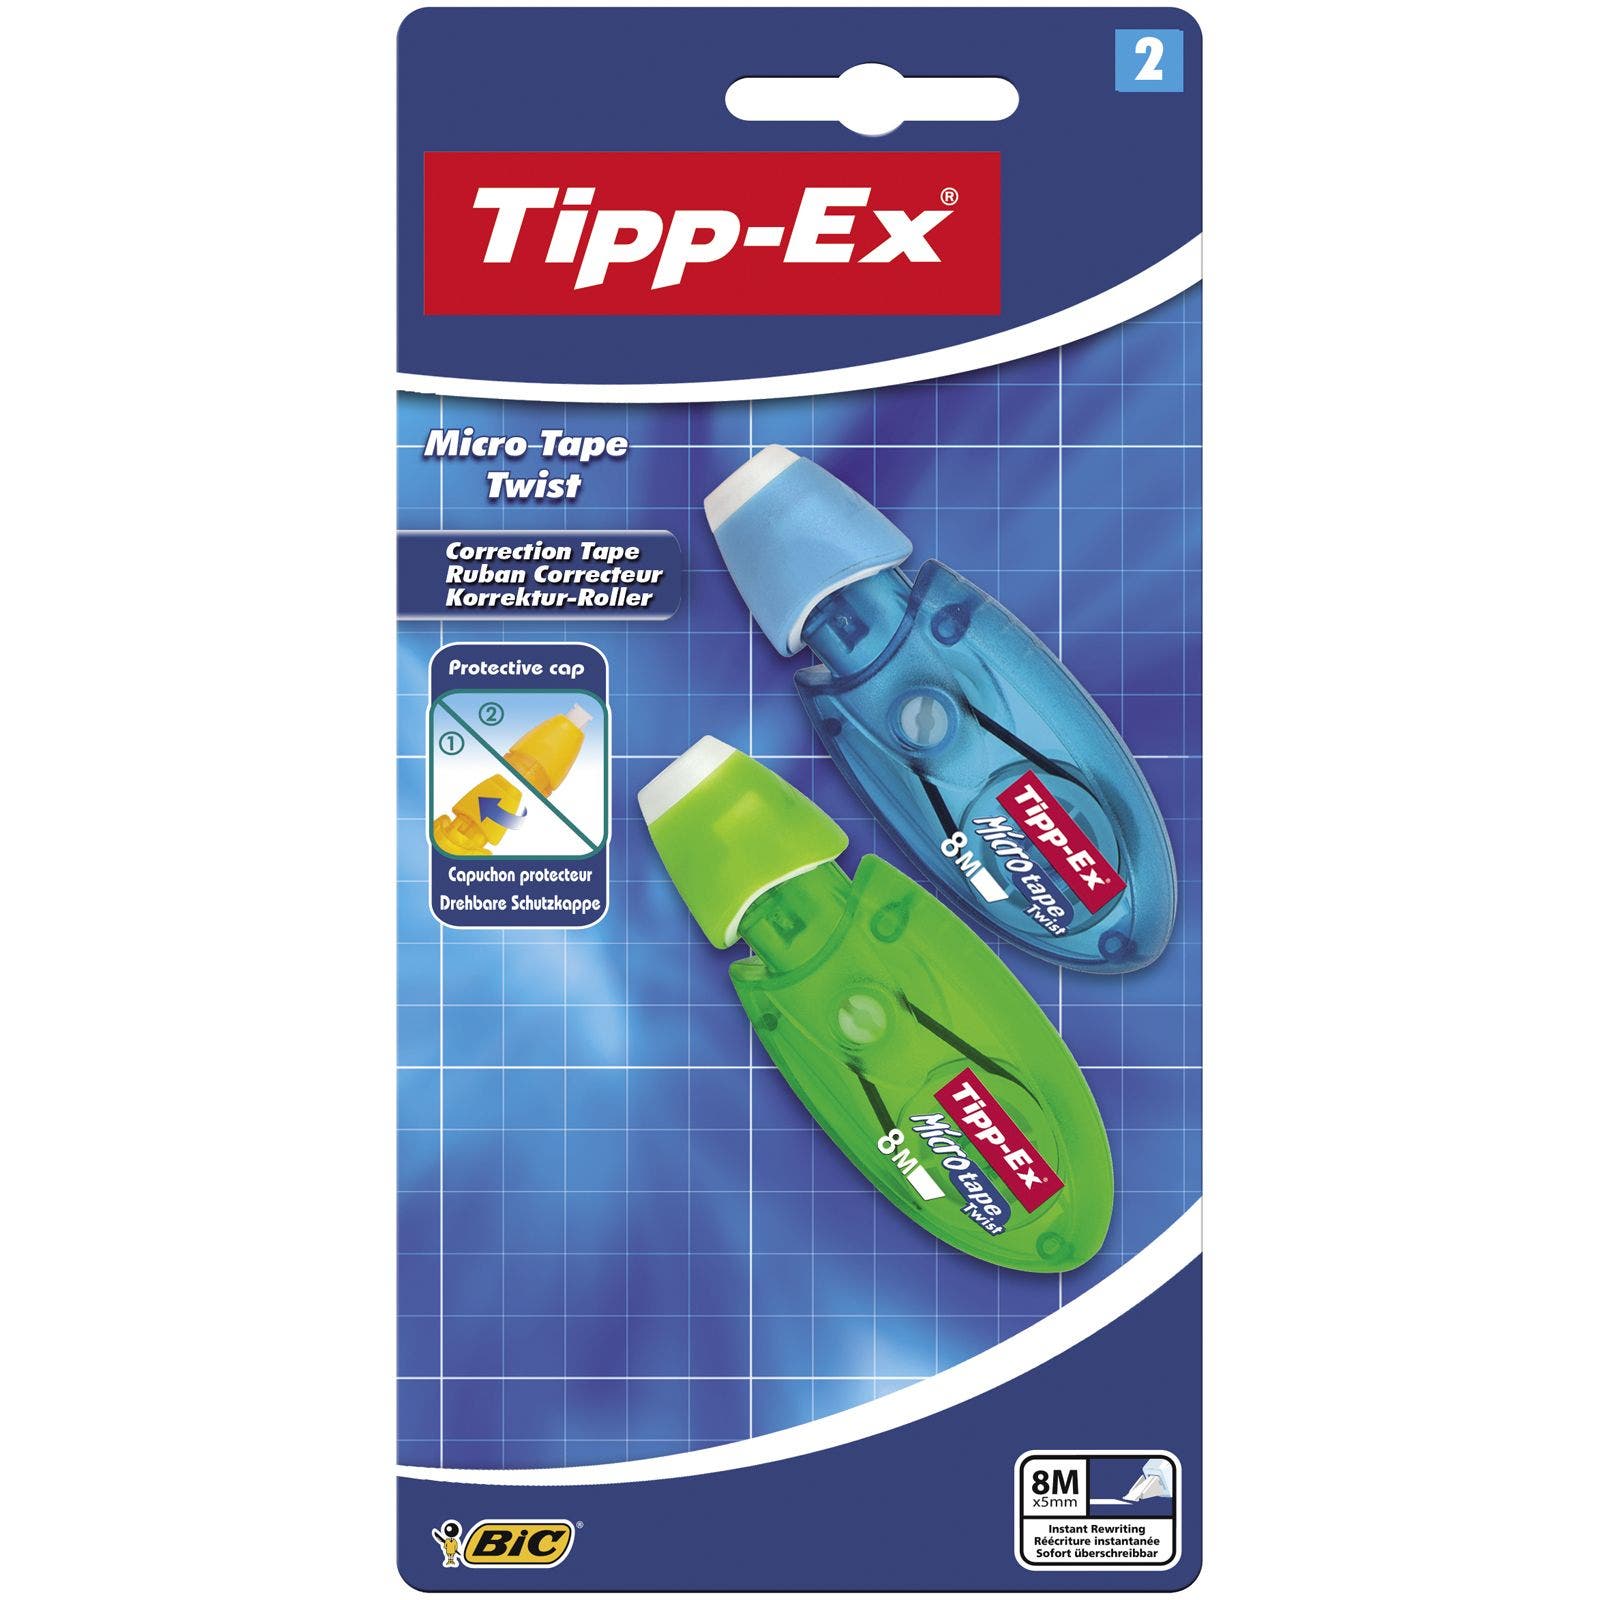 Tipp-Ex Micro Tape Twist Correction Tapes 8 m x 5 mm - Assorted